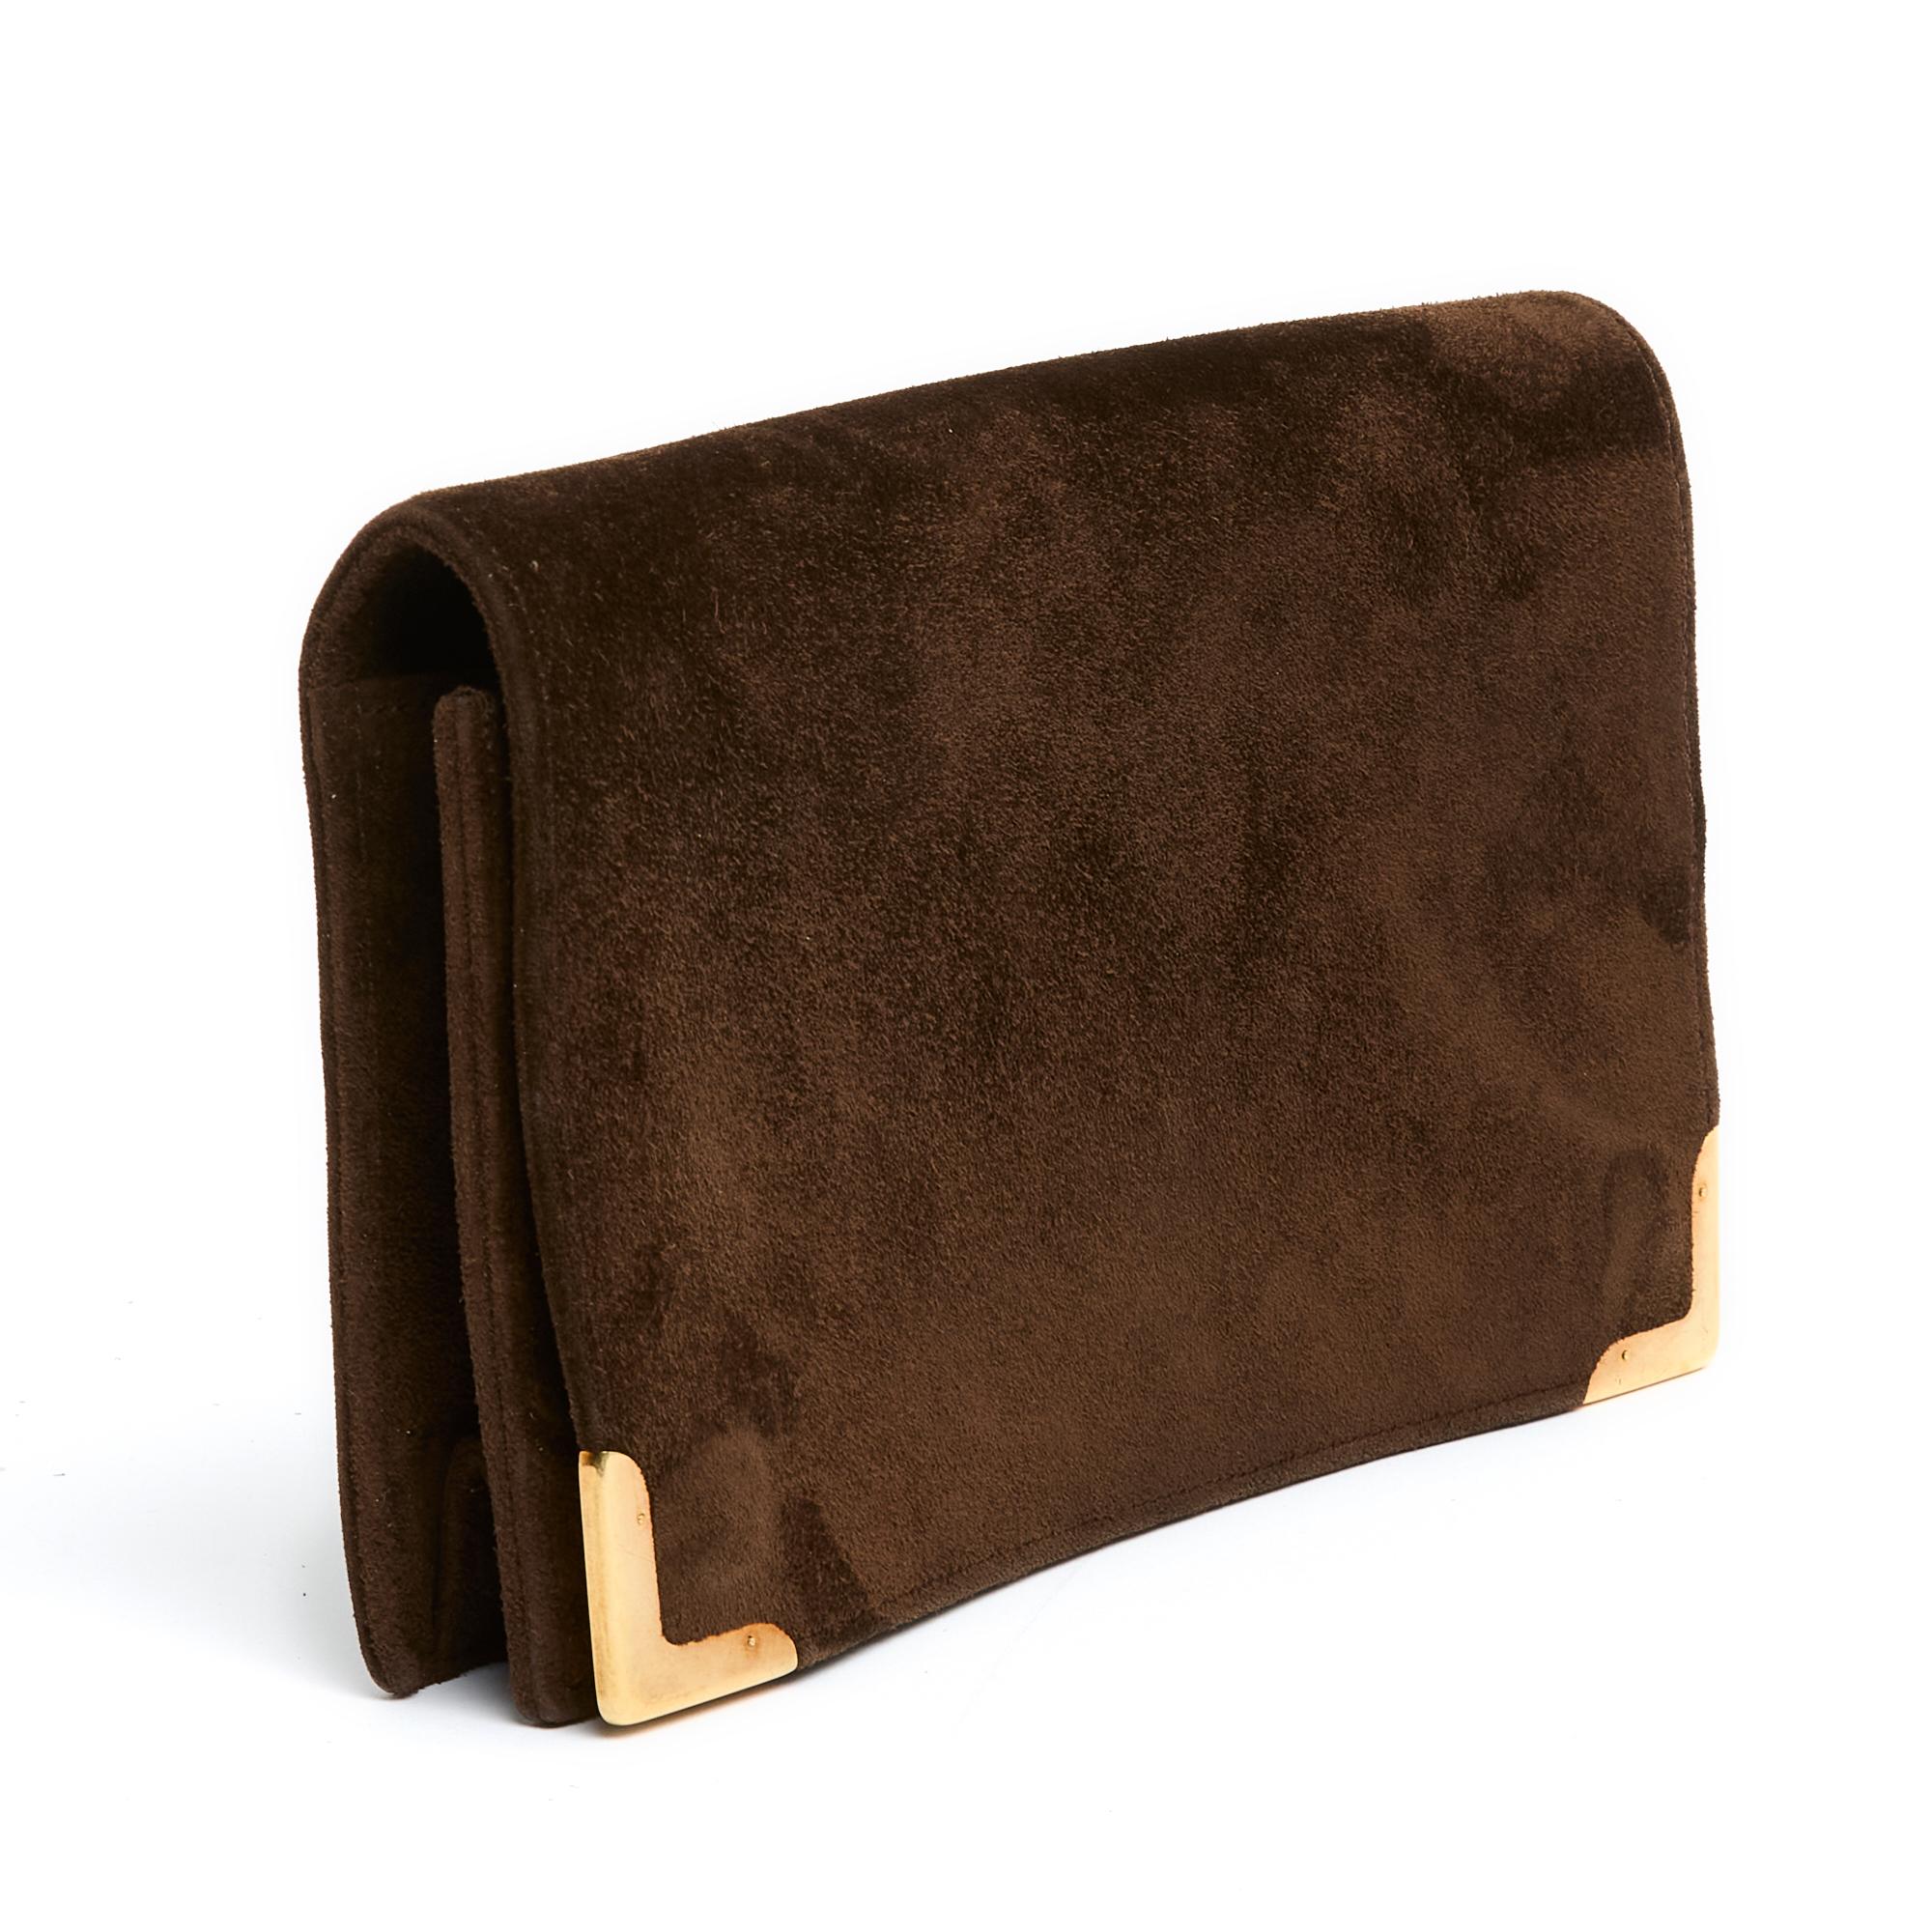 Hermès Coins d'Or clutch bag in brown suede and 18-carat gold (for the corners of the flap), interior in soft leather with 1 zipped pocket and its small leather zipper and 1 front pocket marked with the Hermès Paris logo, year 1972. Width 22 cm x